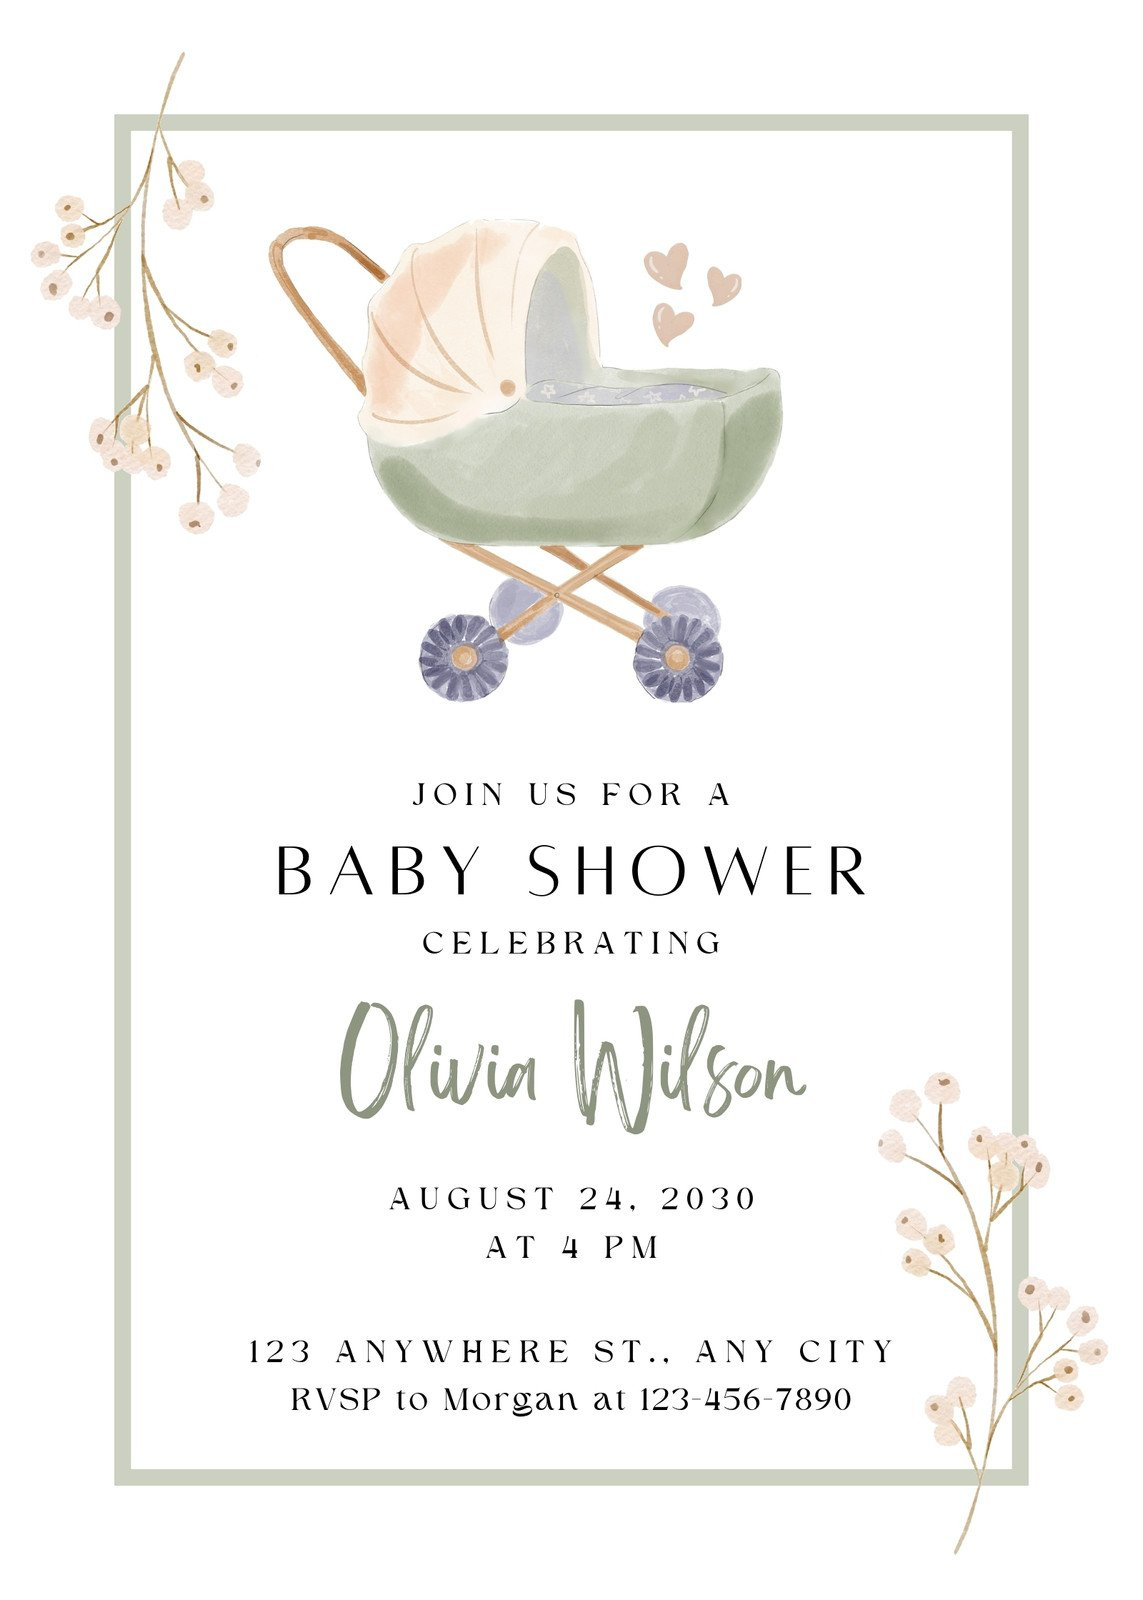 Free And Customizable Baby Shower Templates throughout Free Baby Shower Invitation Maker Online Printable